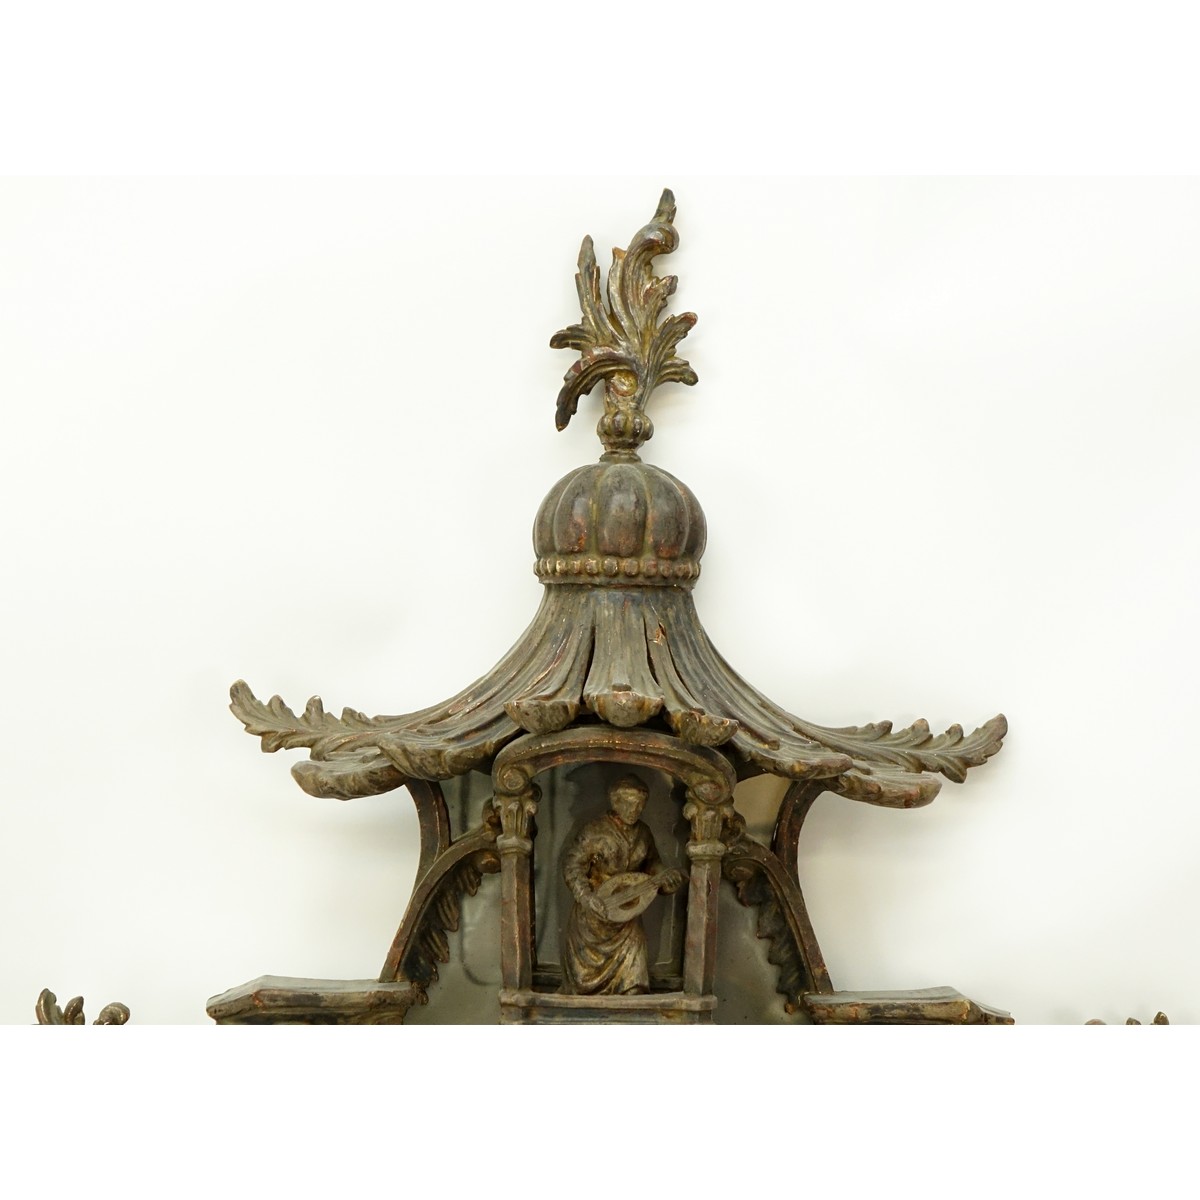 Impressive Large 19/20th Century Carved Wood Chinoiserie Pagoda Mirror. With a seated figure in the pagoda, squirrels, architectural and ornate foliate elements.